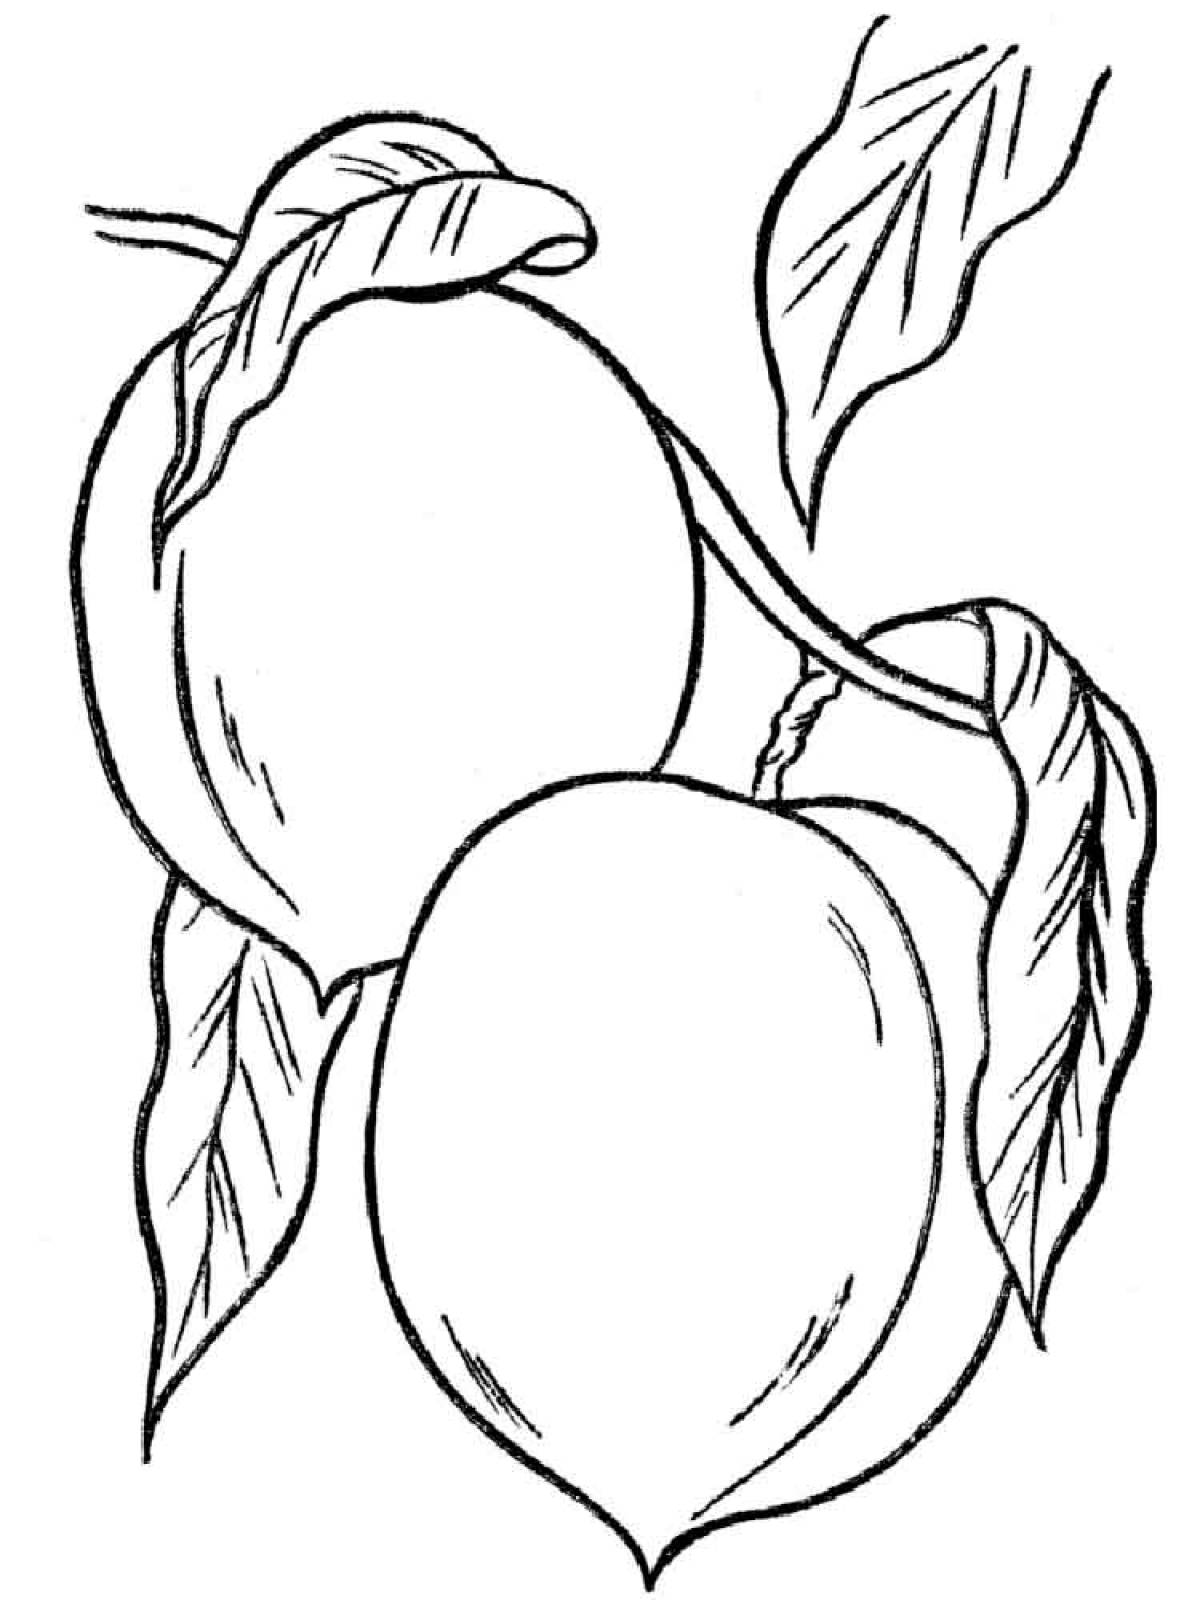 Peach coloring page